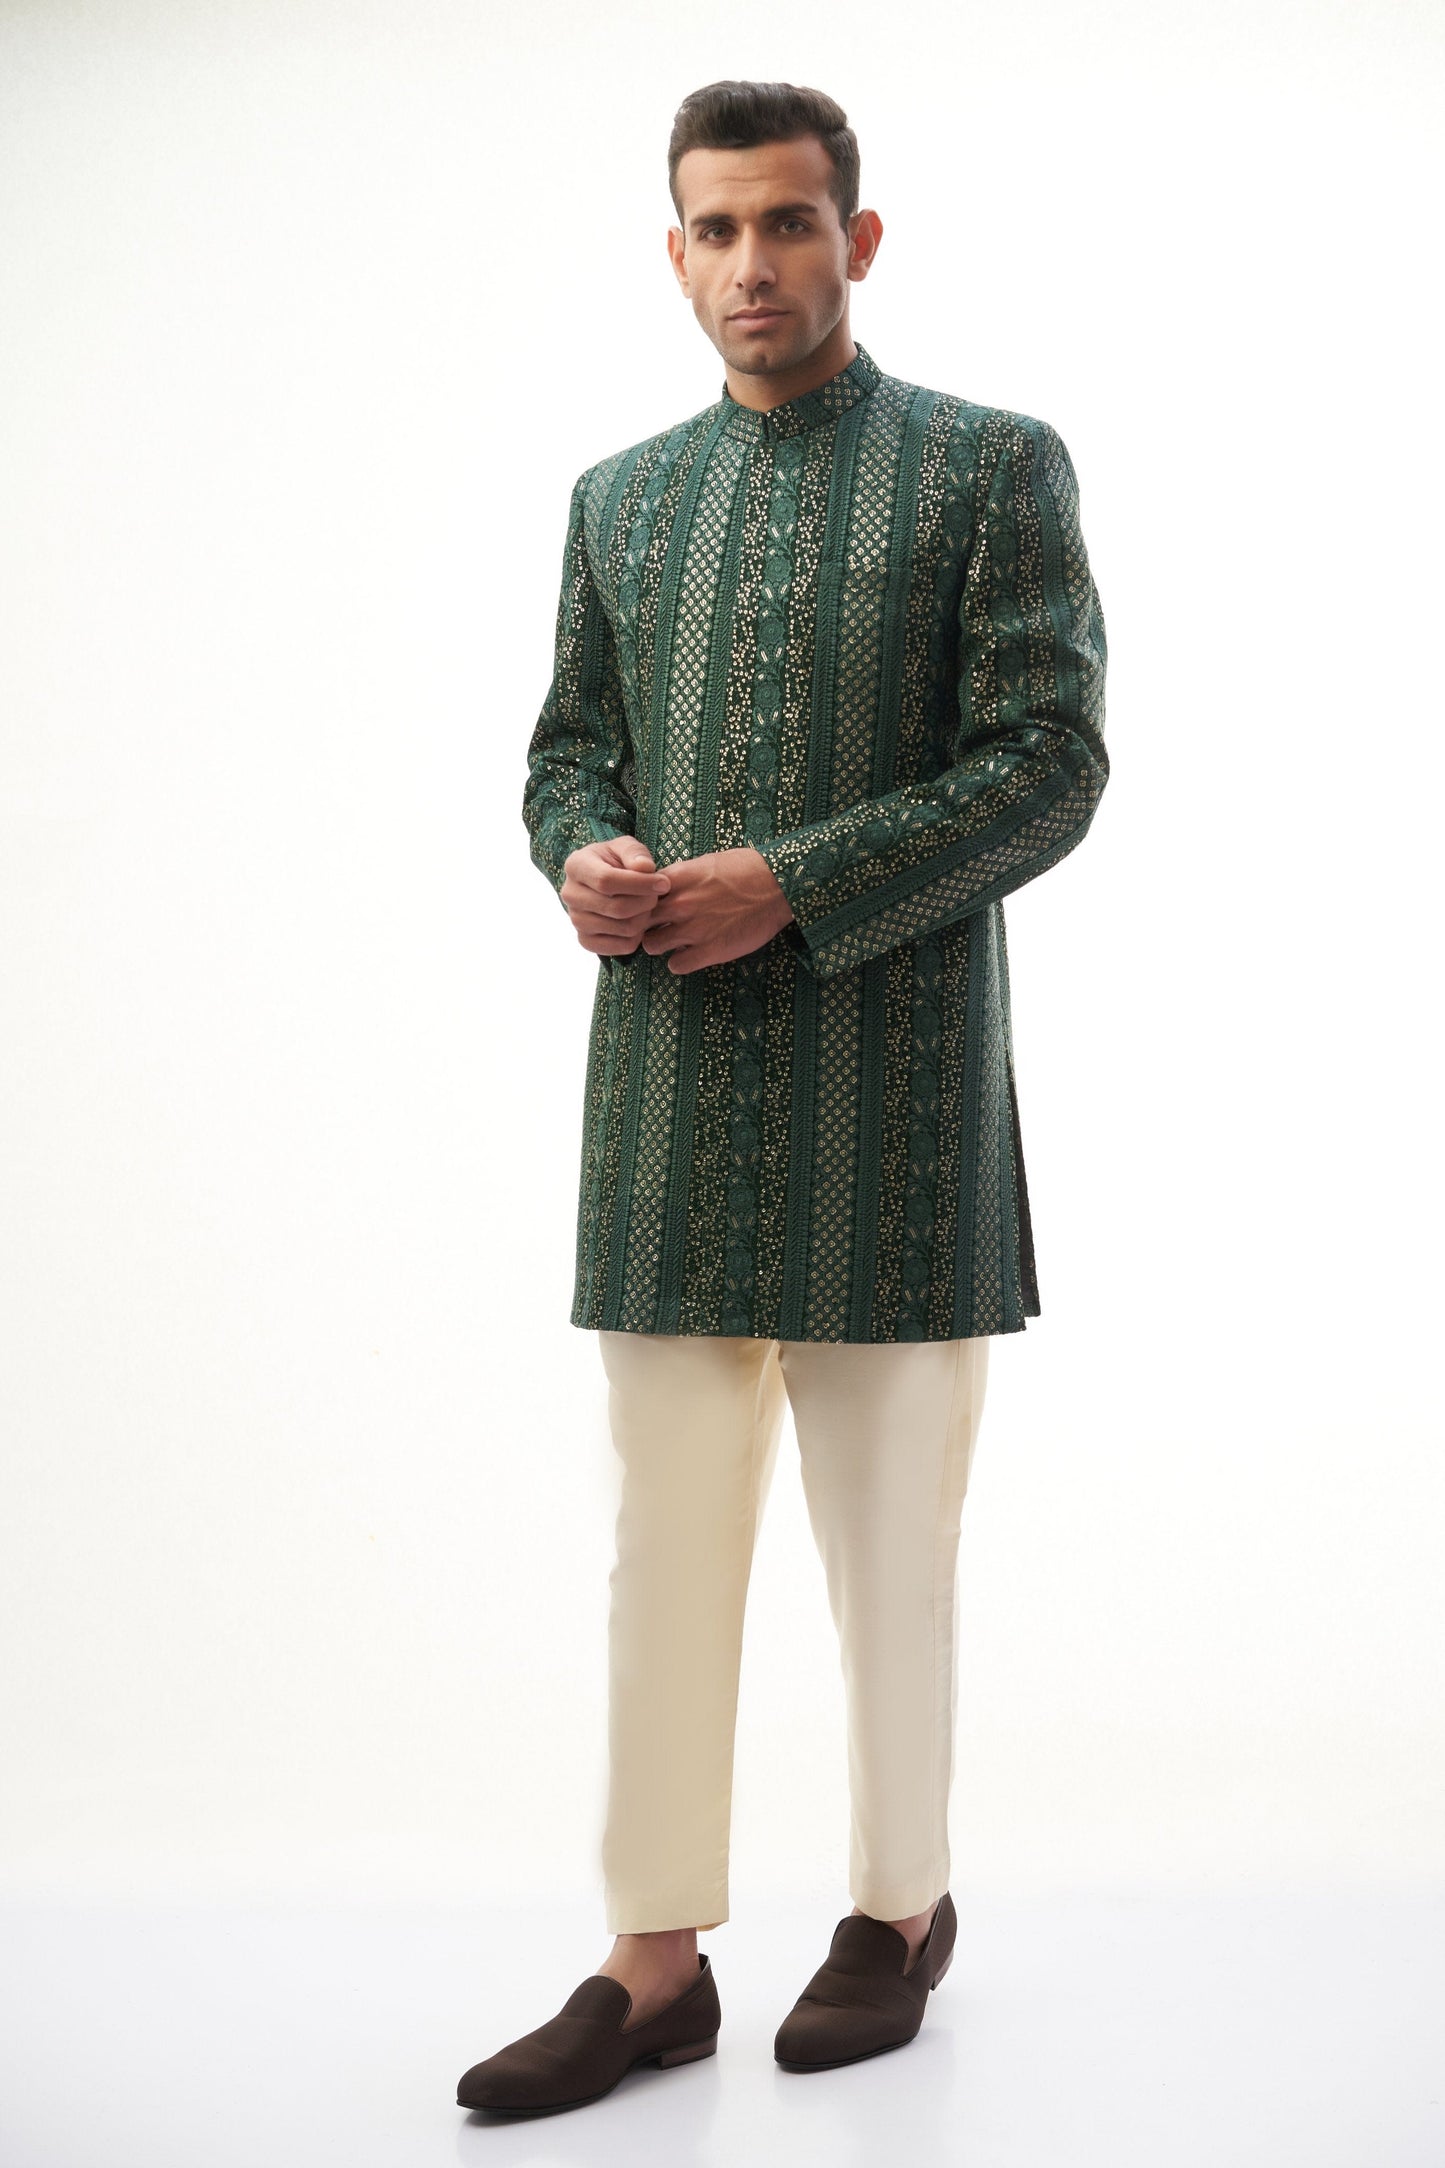  Green & Gold Short-Length Sherwani with Sequins